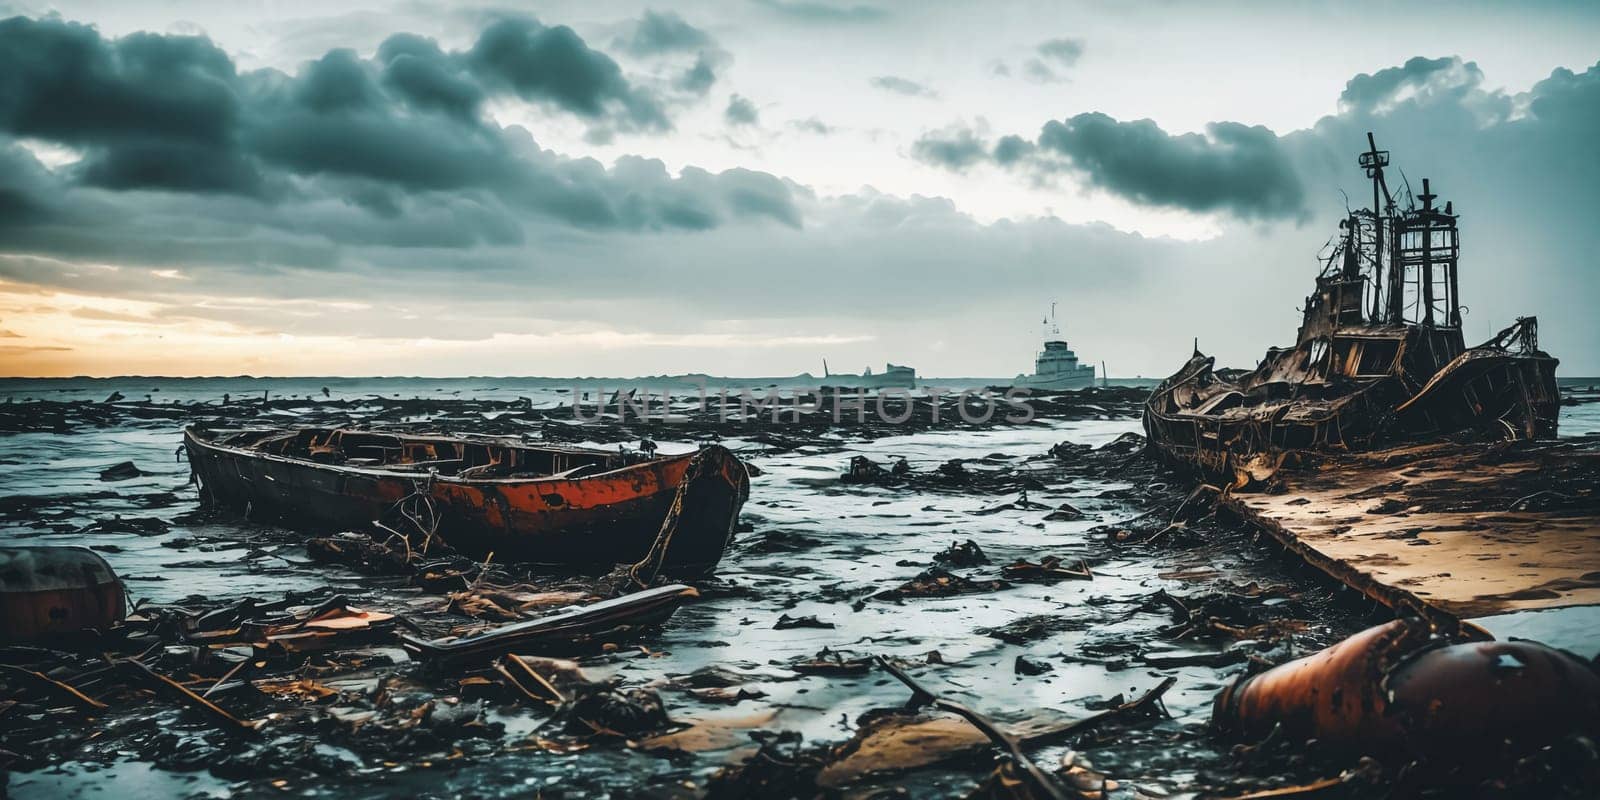 Shipwrecked World. Post-apocalyptic coastal scene with sunken ships, washed-up debris, and a desolate shoreline overlooking a vast and unforgiving sea.